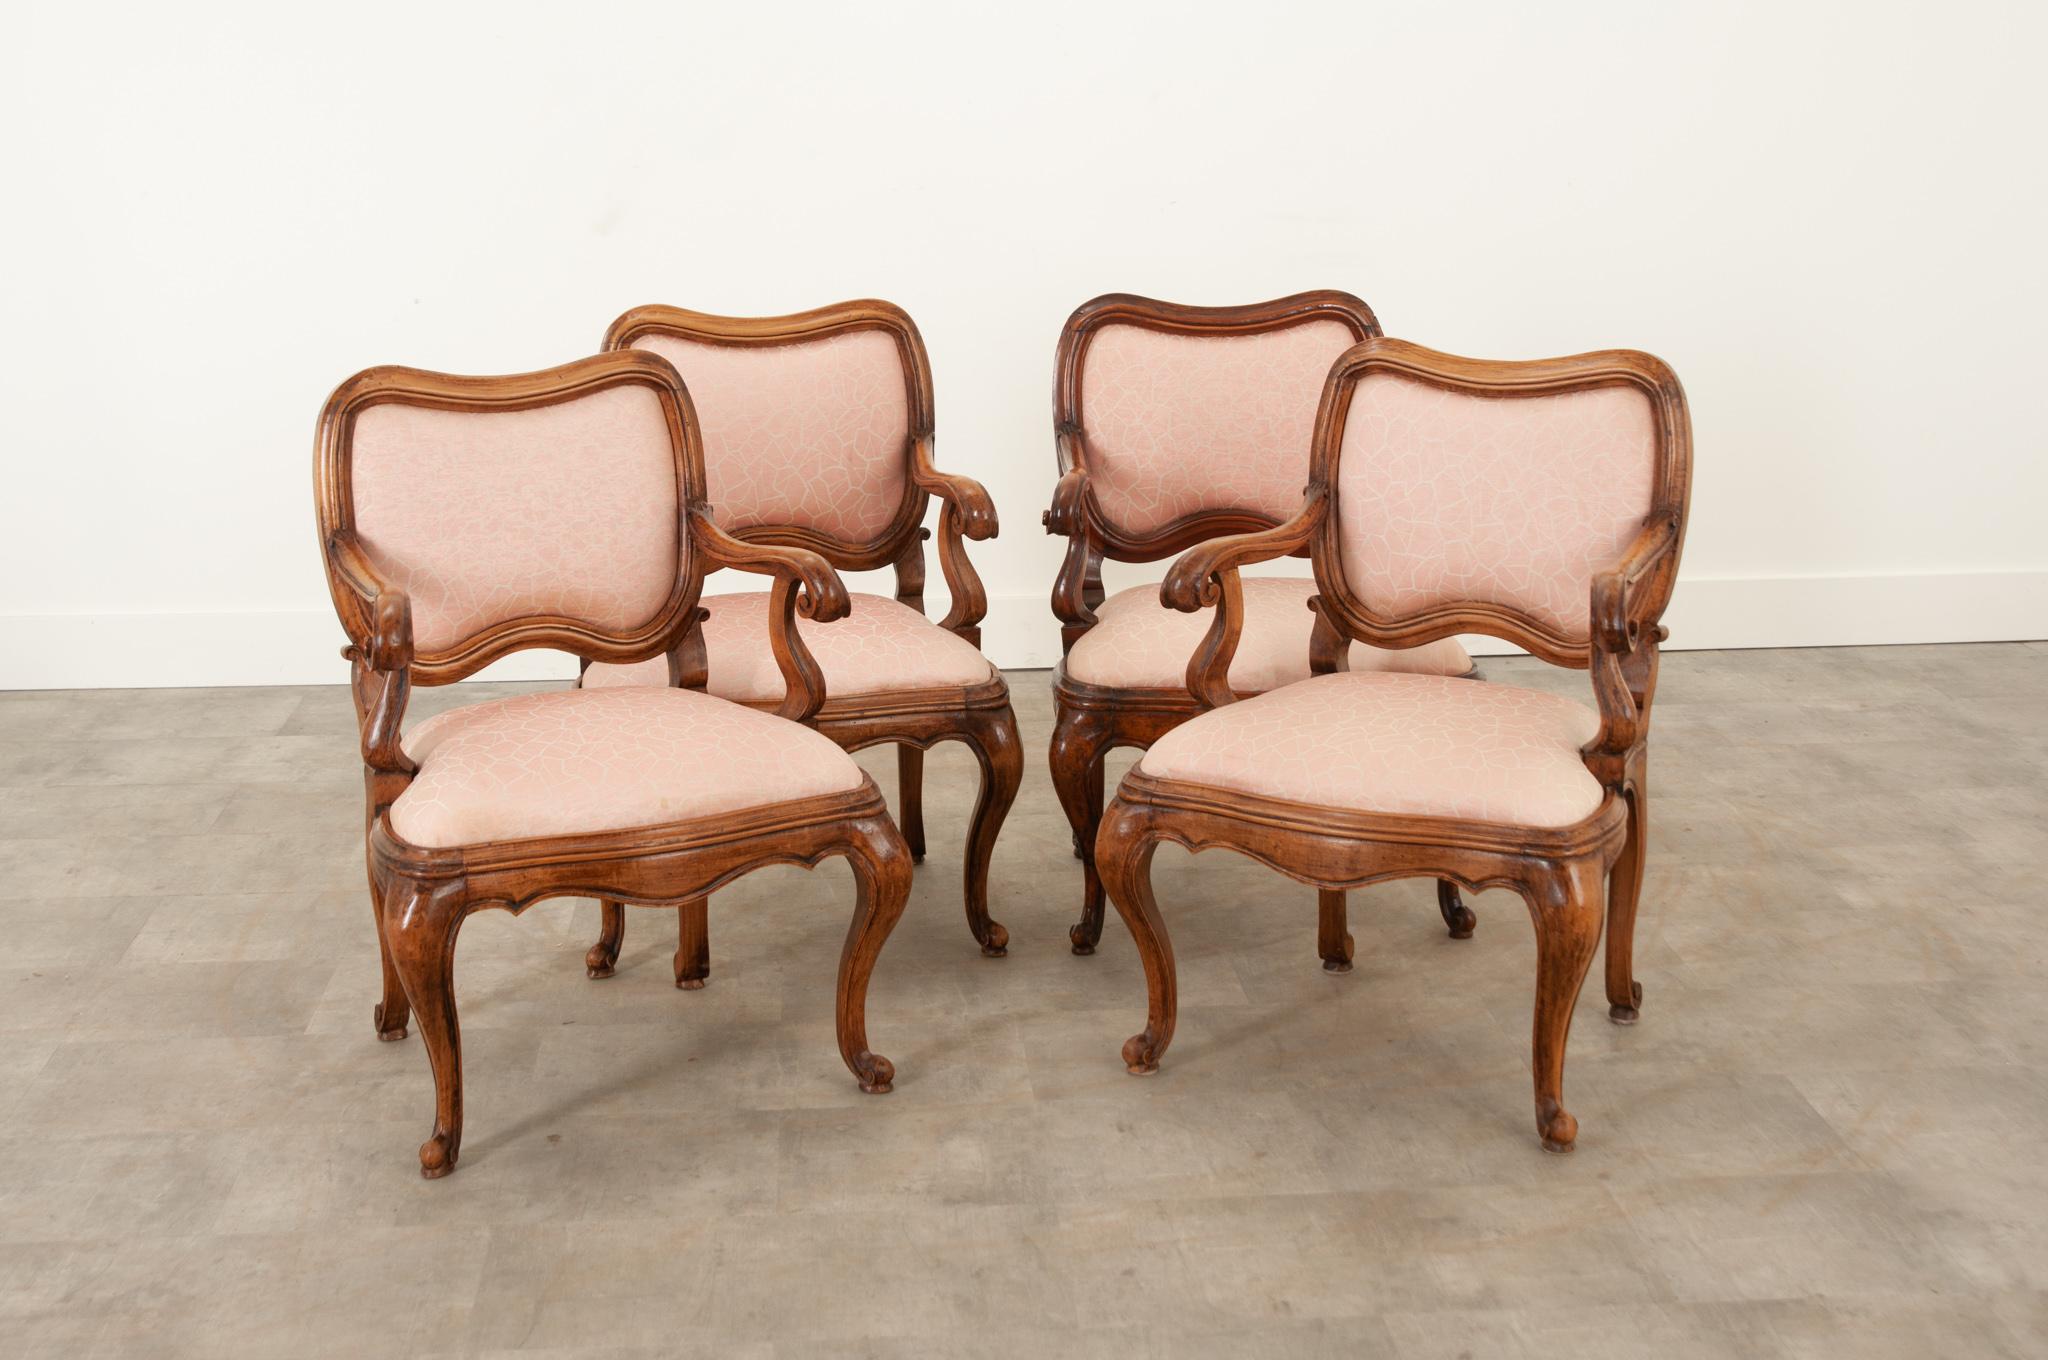 Carved Set of 4 Vintage Italian Rococo Arm Chairs For Sale